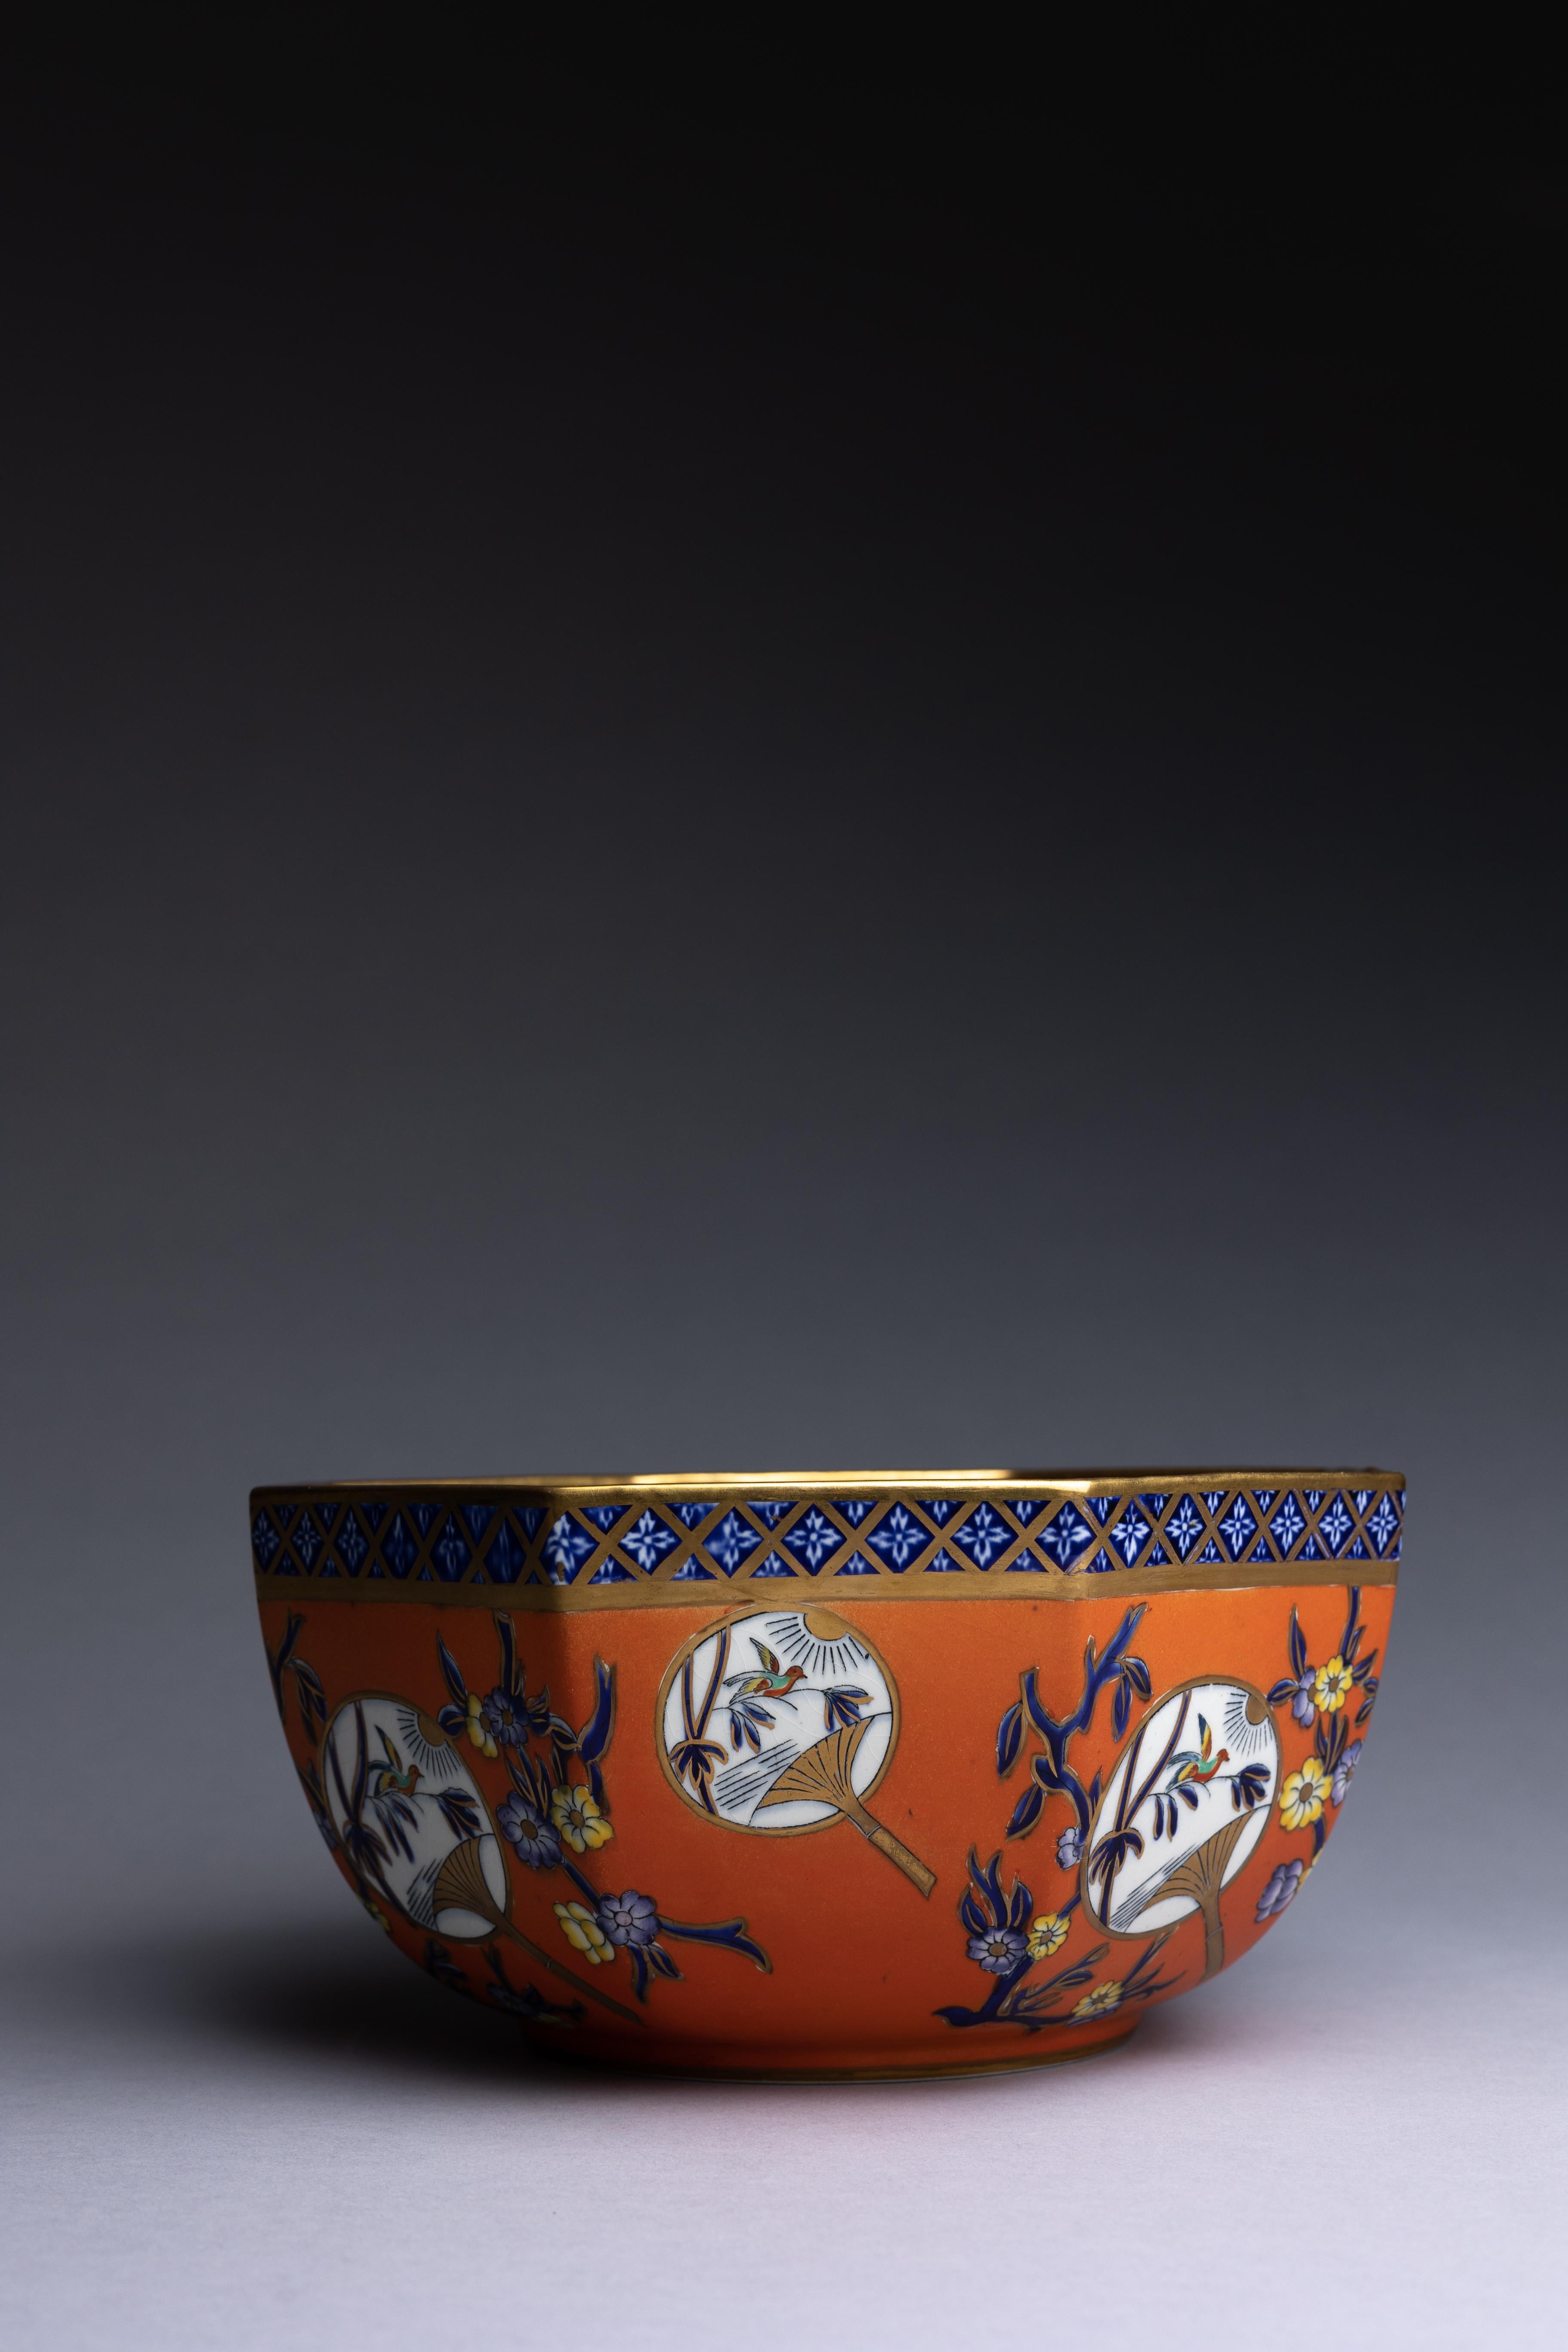 A Mason’s Ashworth octagonal ironstone bowl decorated in a lively orange glaze with delicate chinoiserie details throughout.

The design is transfer-printed in under- and over-glaze blue with a pattern of birds and Chinese fans nestled in stylized